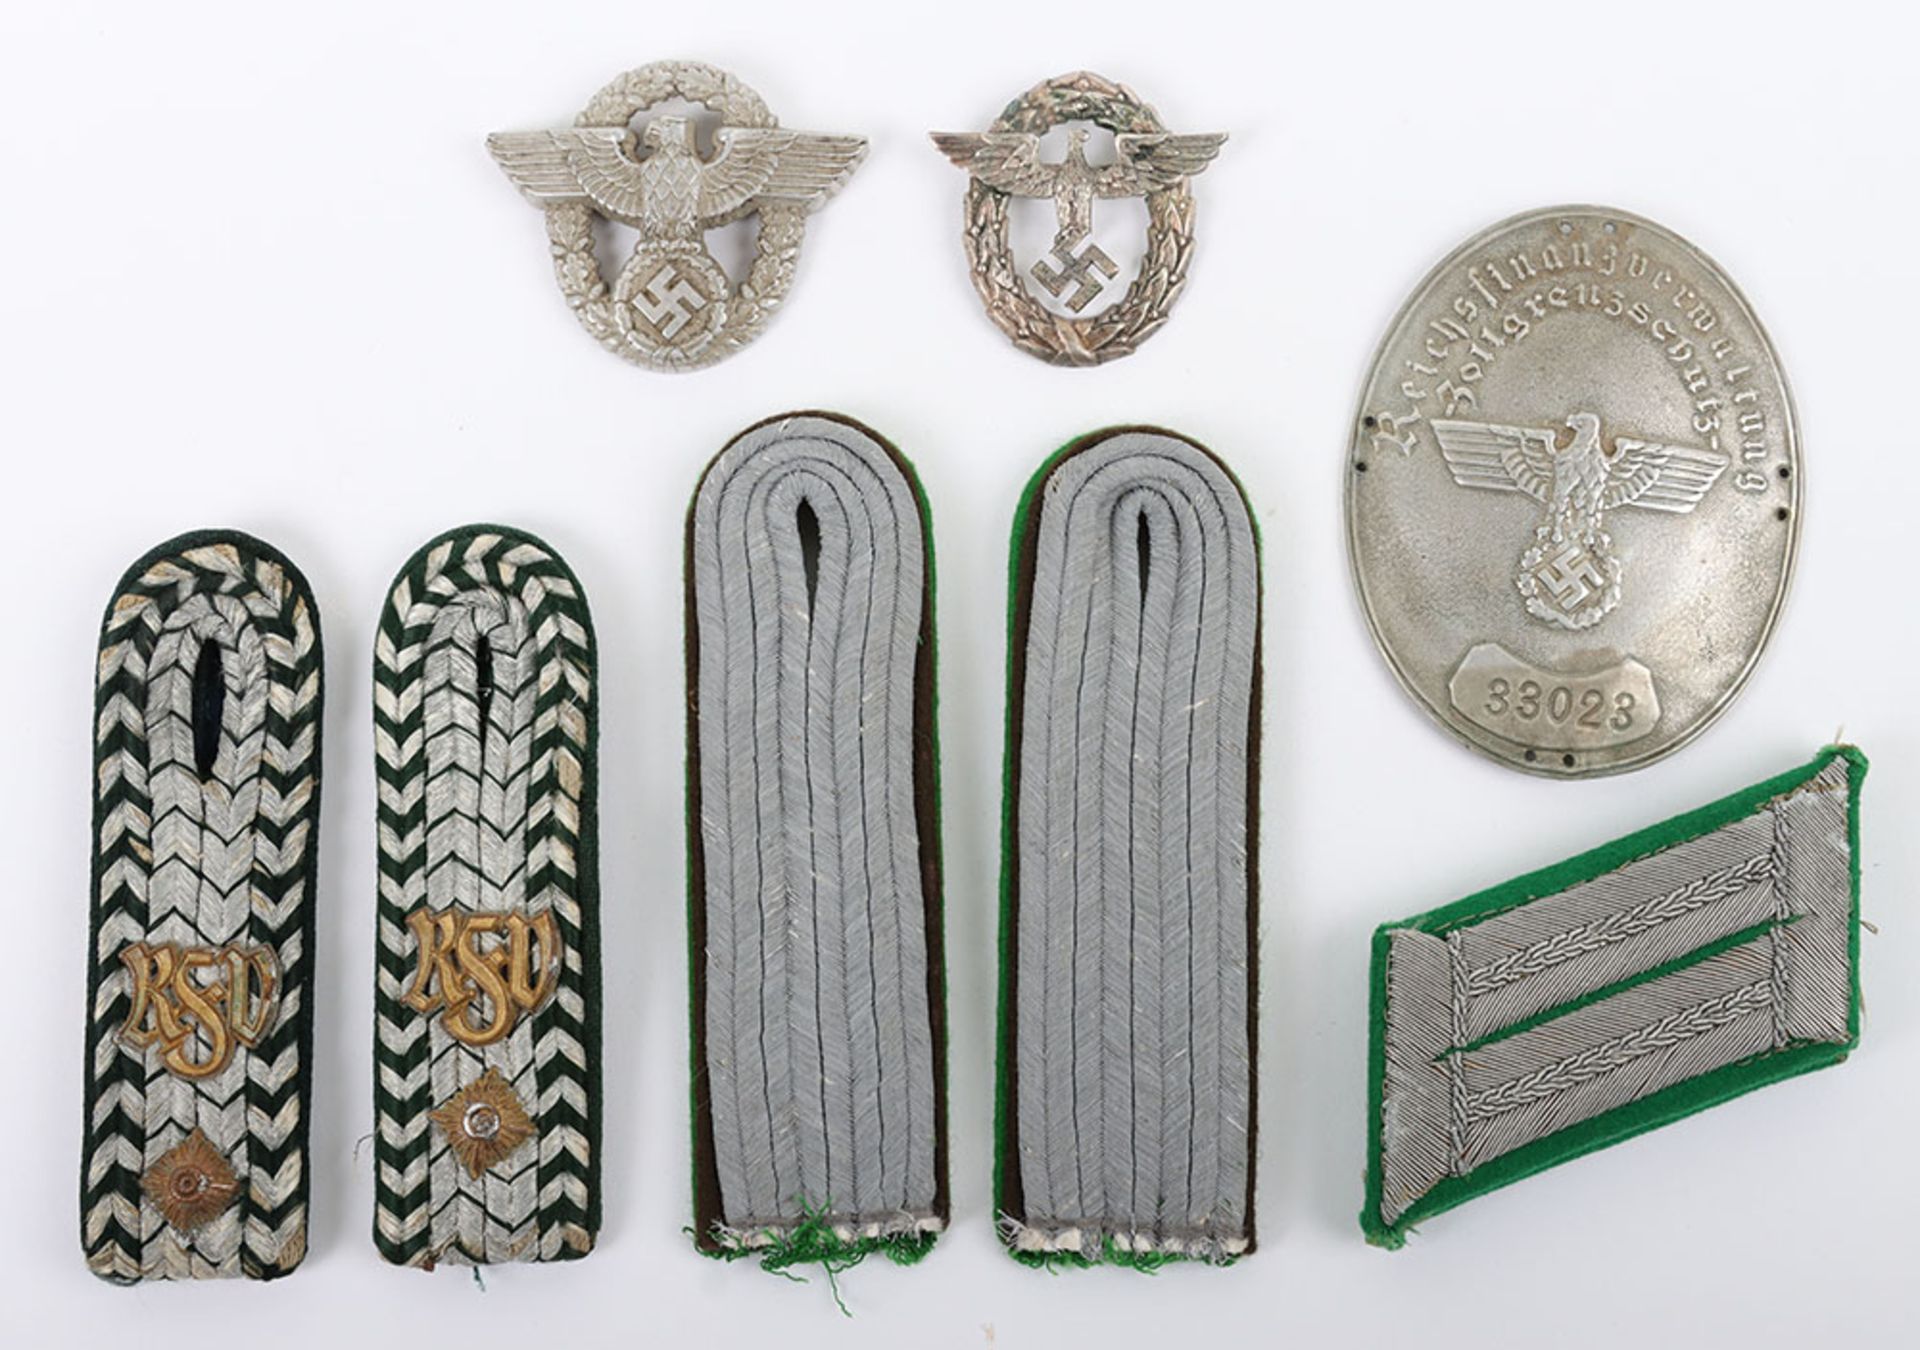 WW2 German Police Badges and Insignia - Image 2 of 3